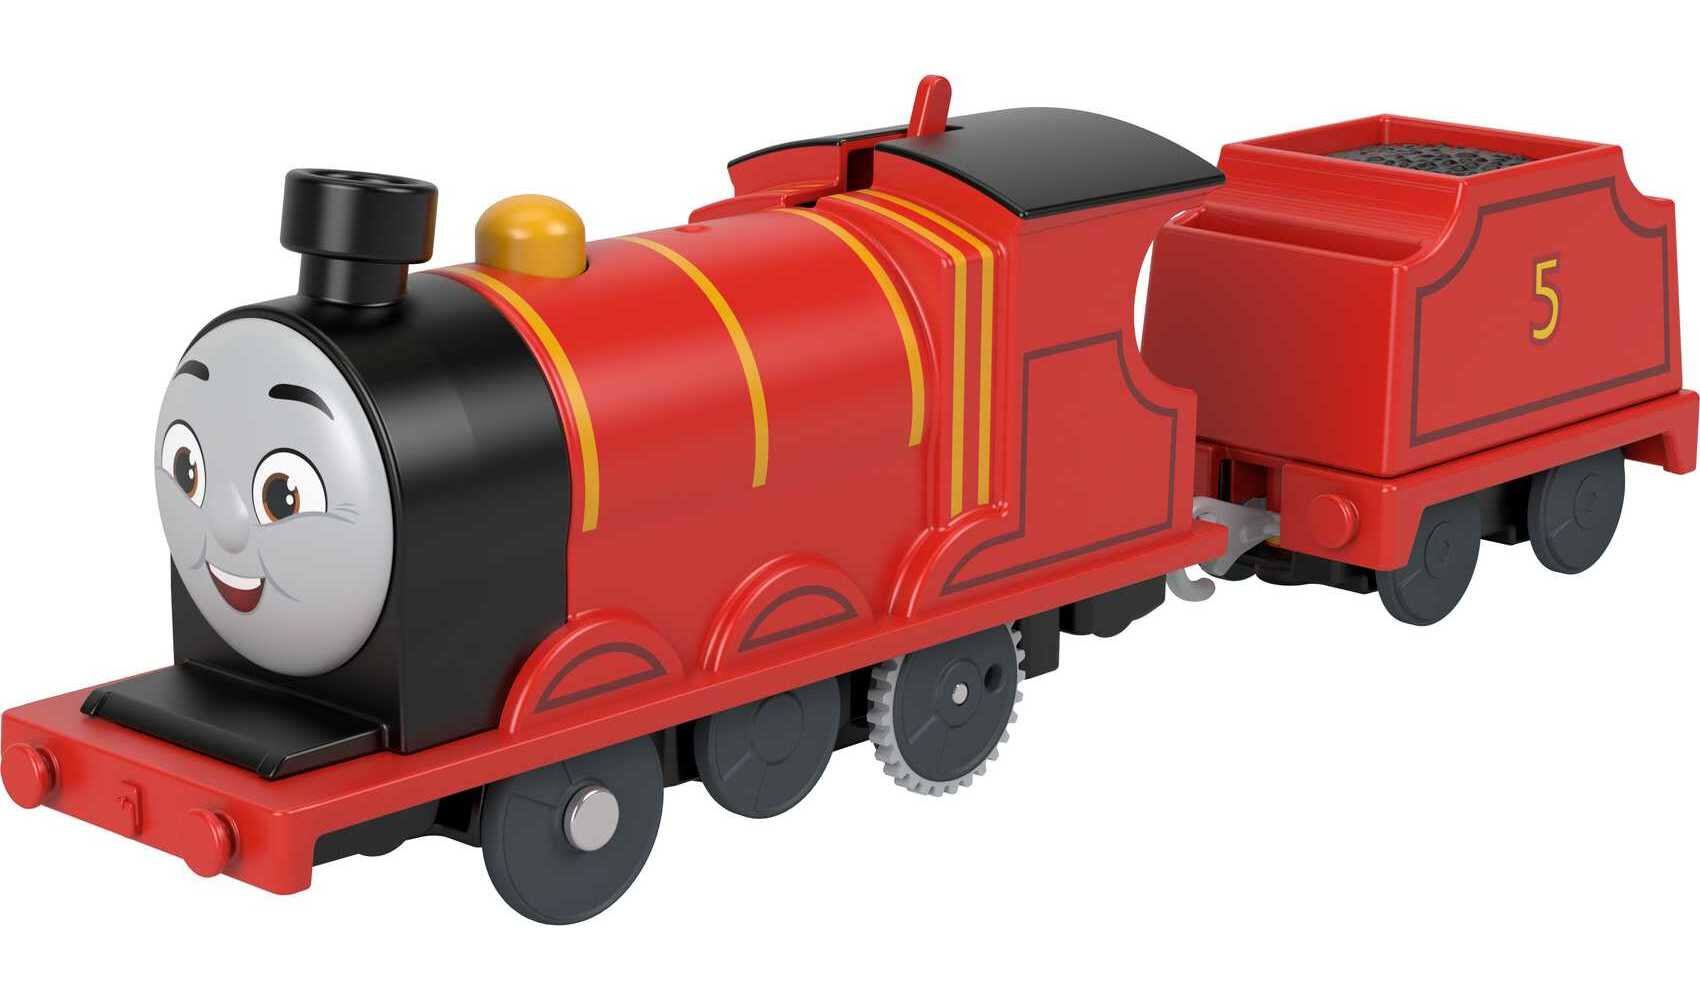 Fisher-Price Thomas & Friends James Motorized Toy Train, Battery-Powered Engine With Tender For Preschool Kids Ages 3 And Up